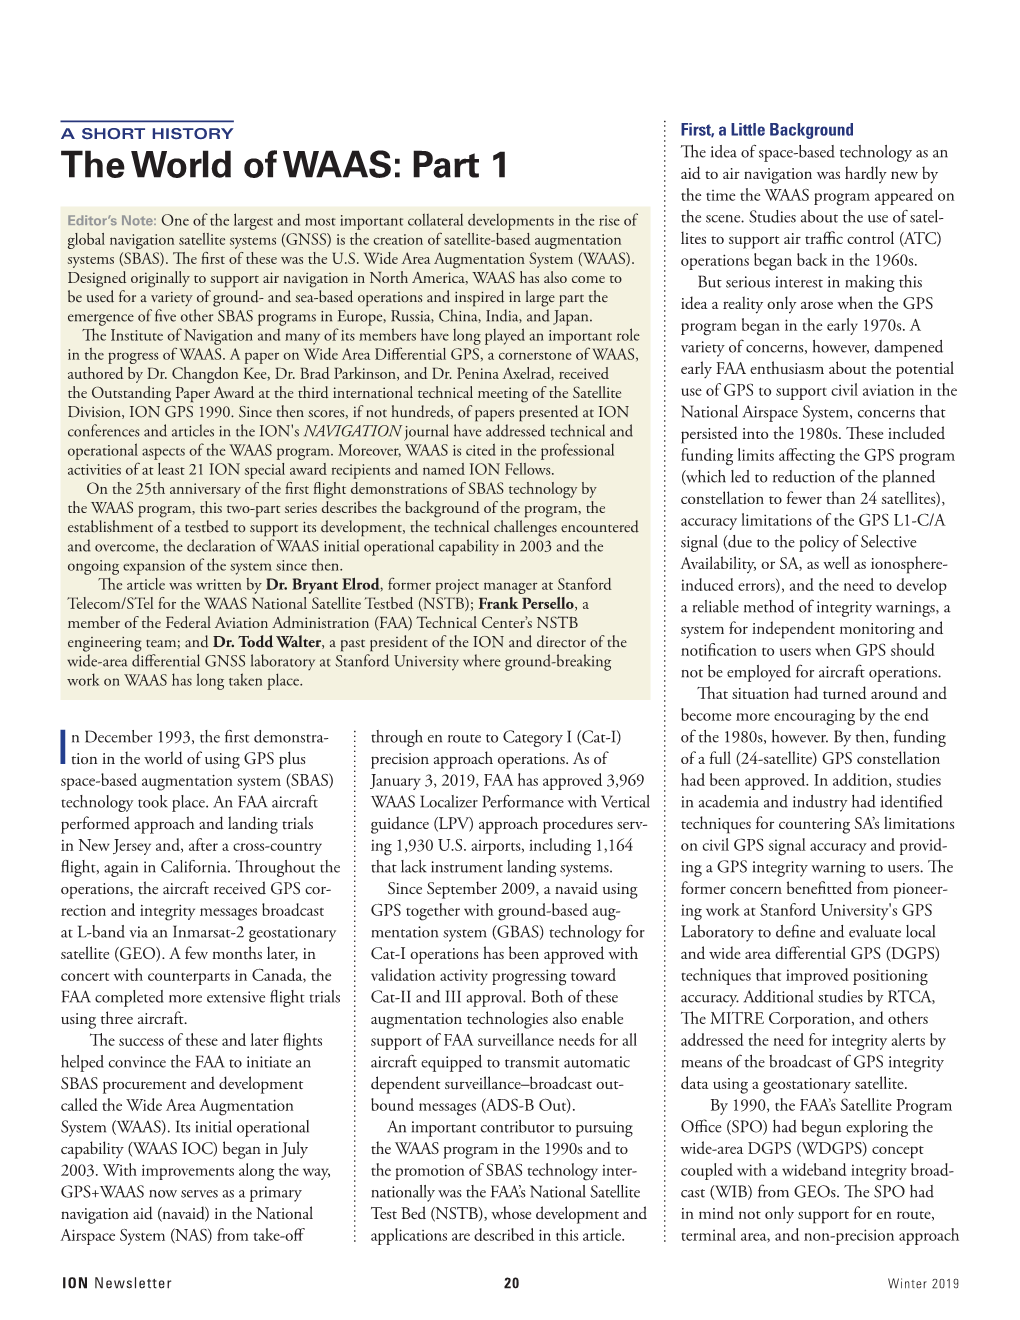 The World of WAAS: Part 1